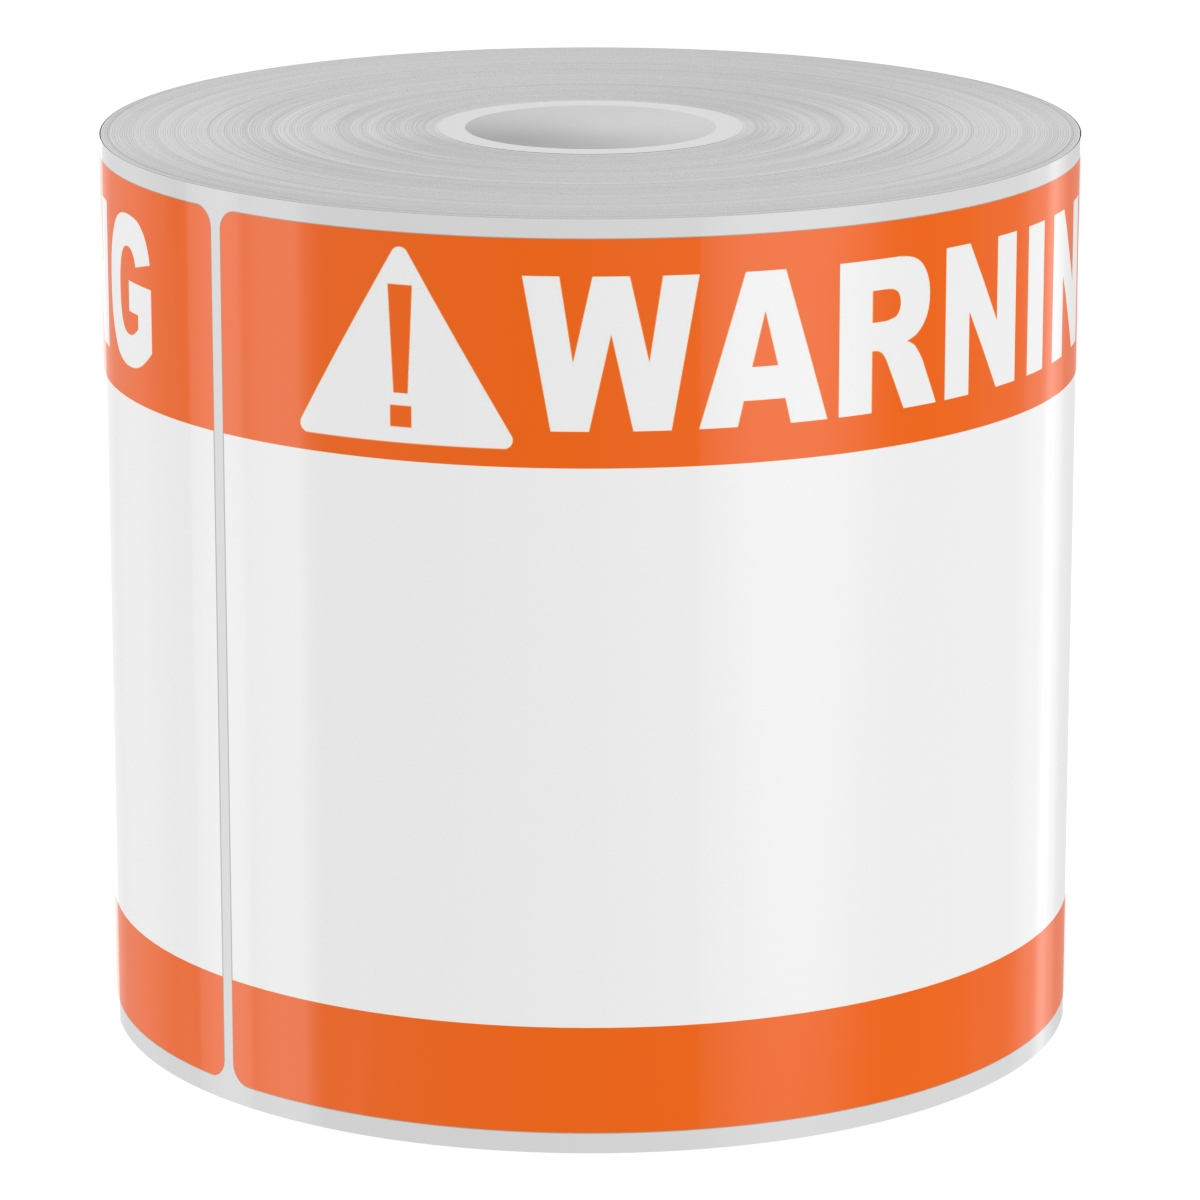 Detail view for 250 4" x 6" High-Performance Arc Flash Orange Double Band with White Warning